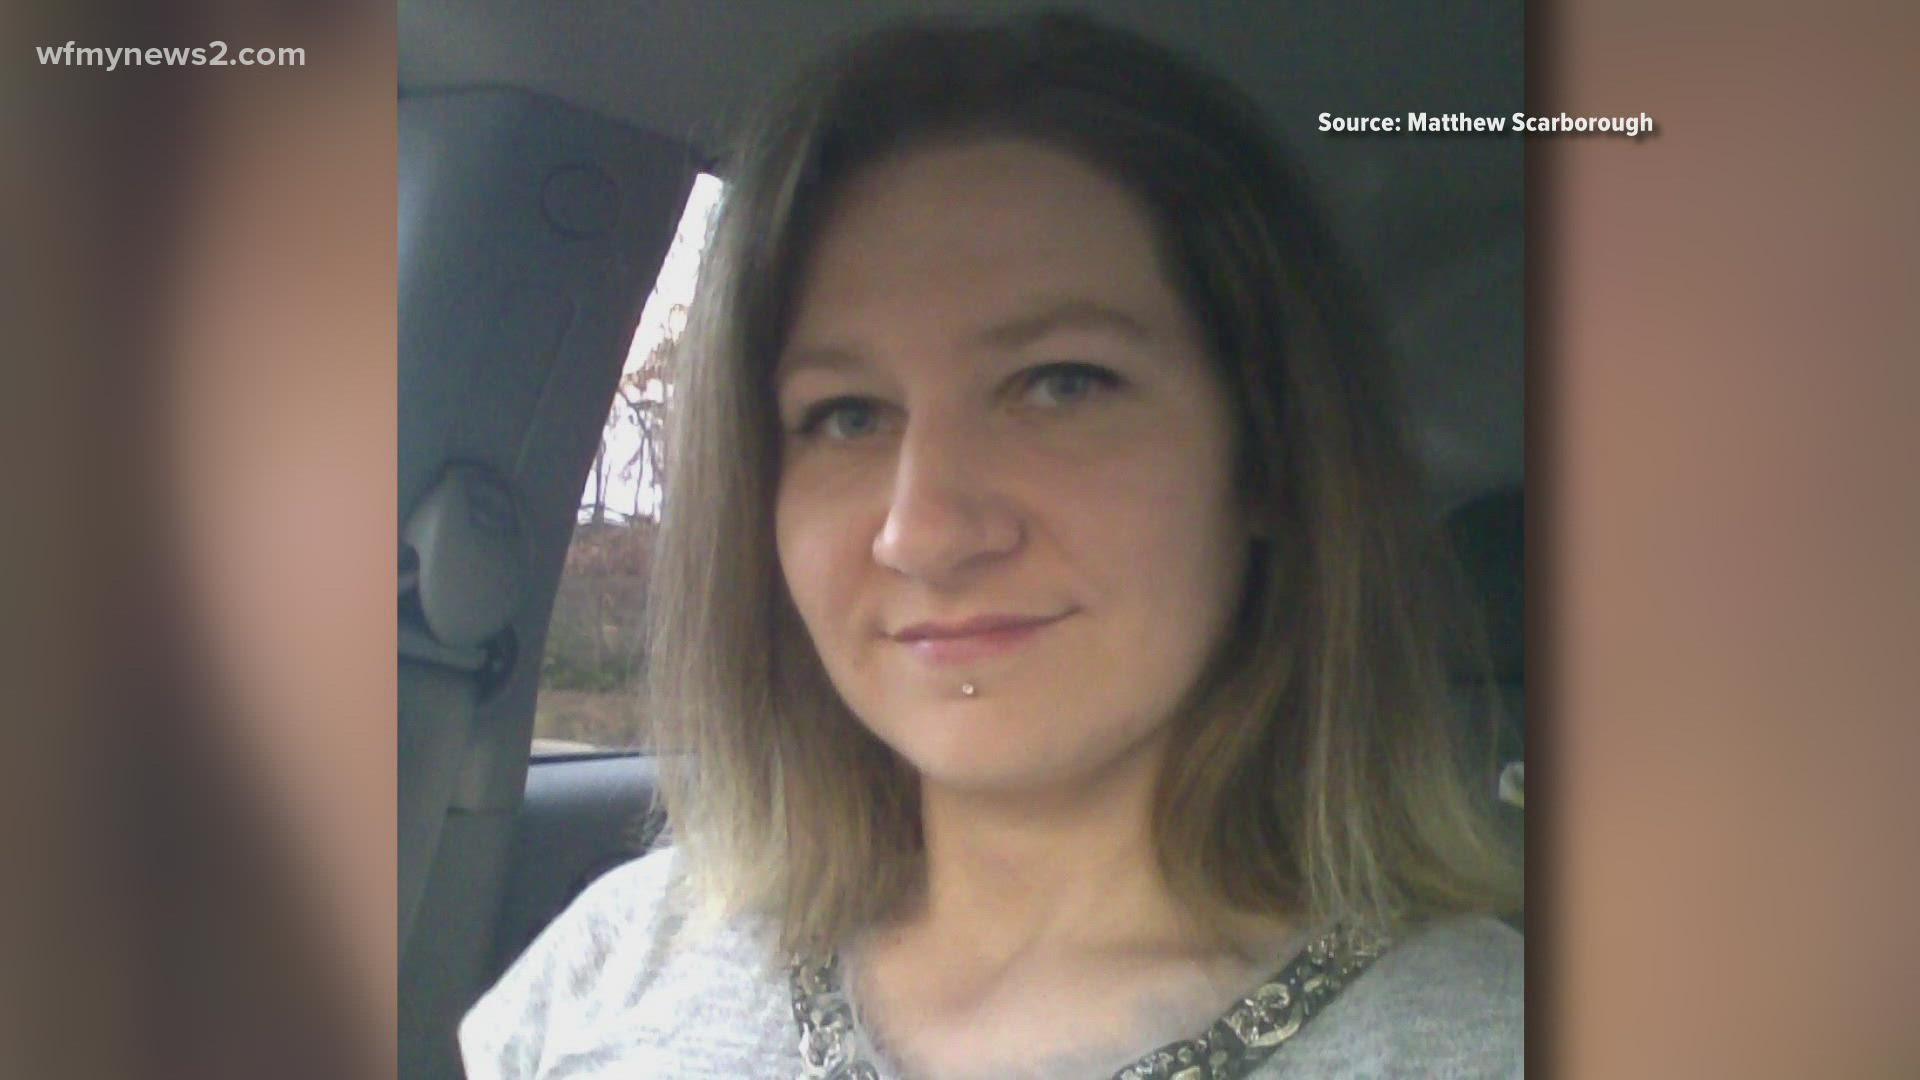 Greensboro police say Amanda Joy Moorefield was reported missing on July 22. Her body was found buried in Chatham County on Friday.